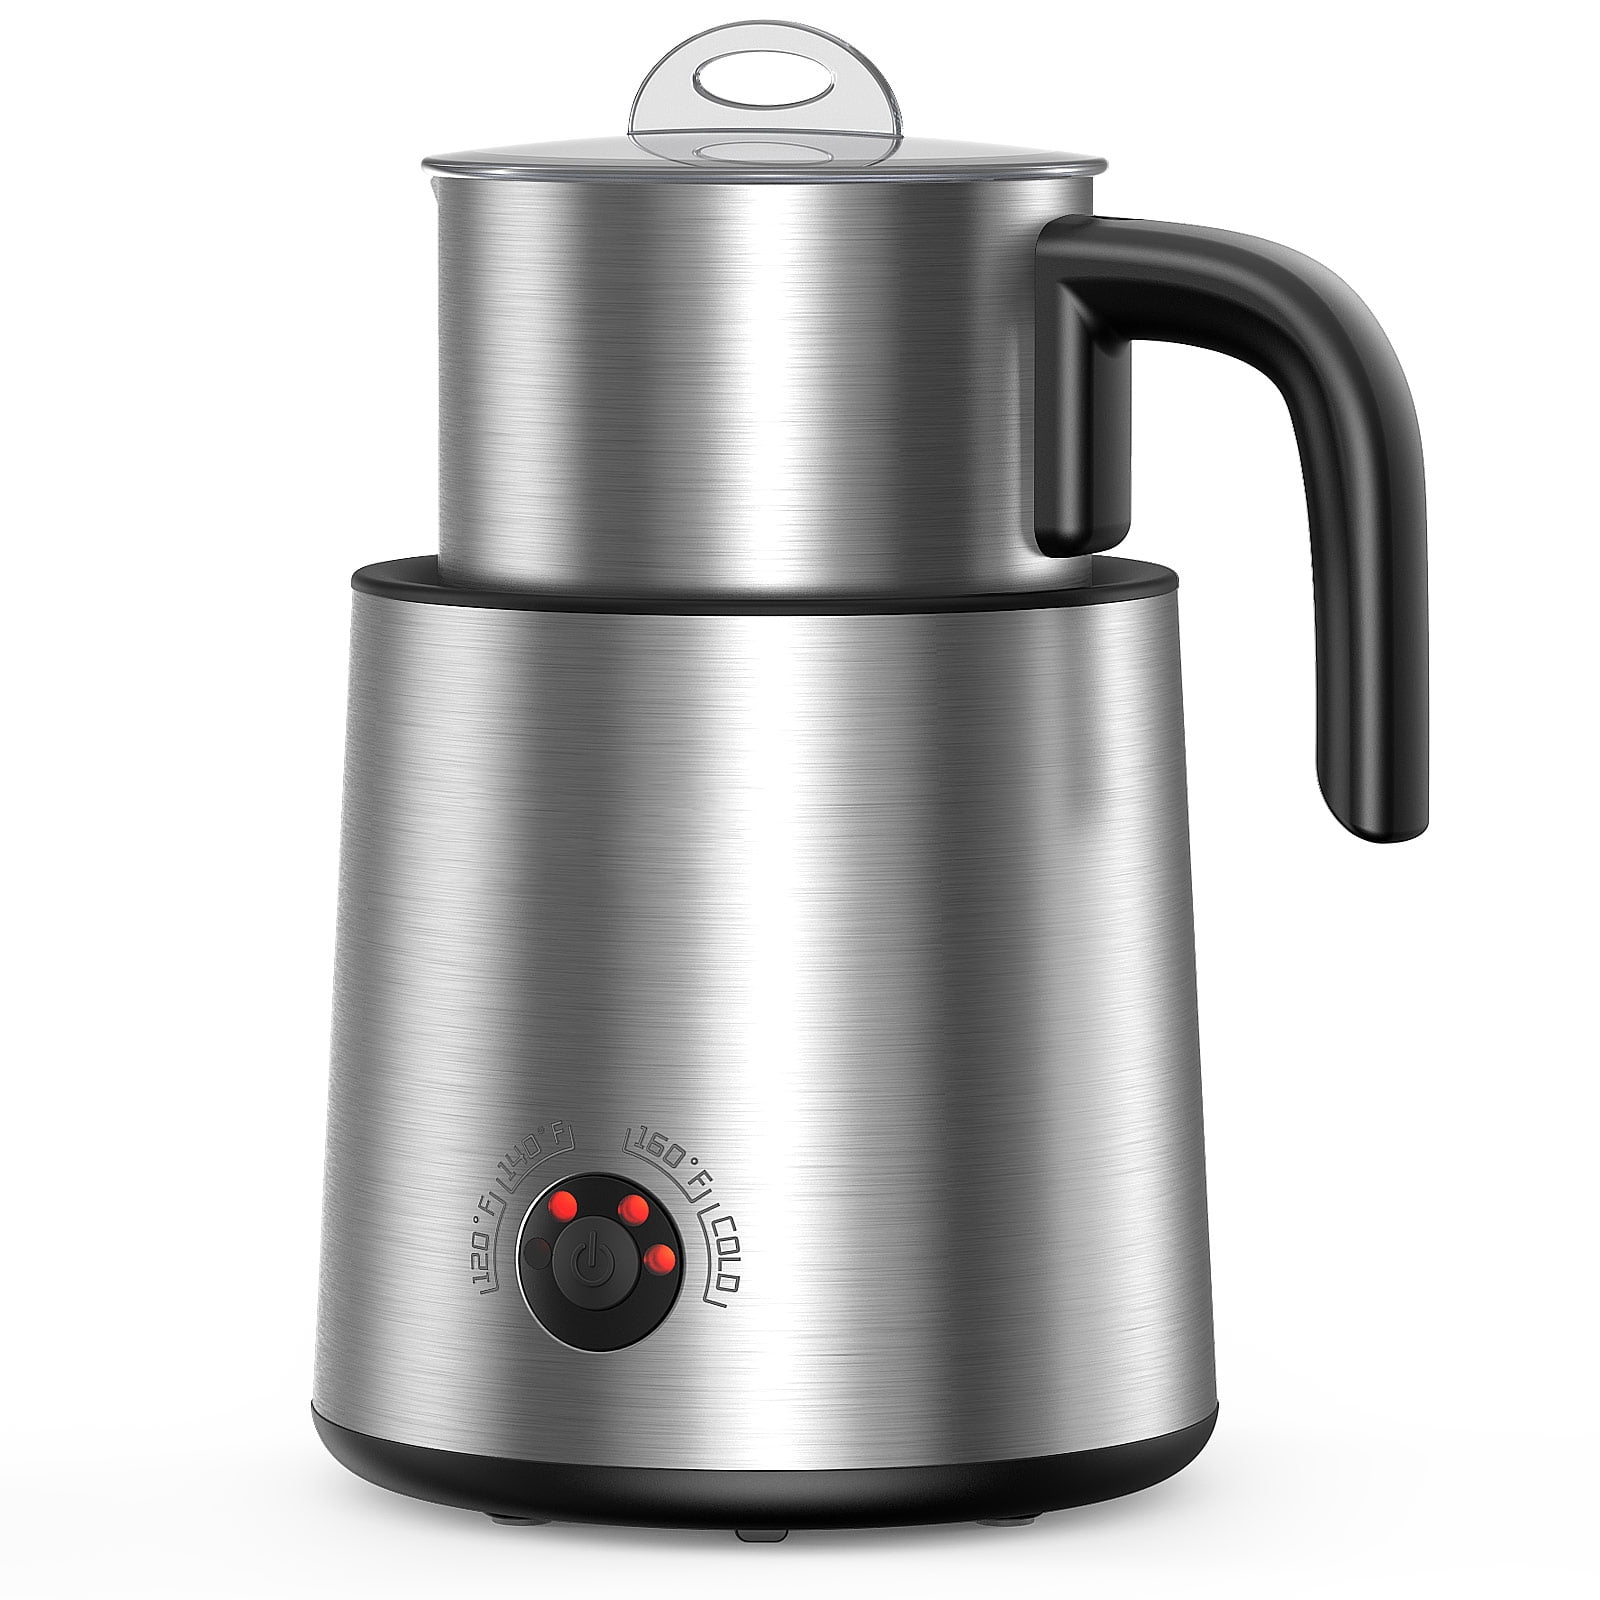 Steam Milk Frother, Commercial Milk Foamer, with 3-hole Nozzle, Air  Pressure Gauge, 450ml Kettle, Open Flame and Induction Hob Heating, for  Home